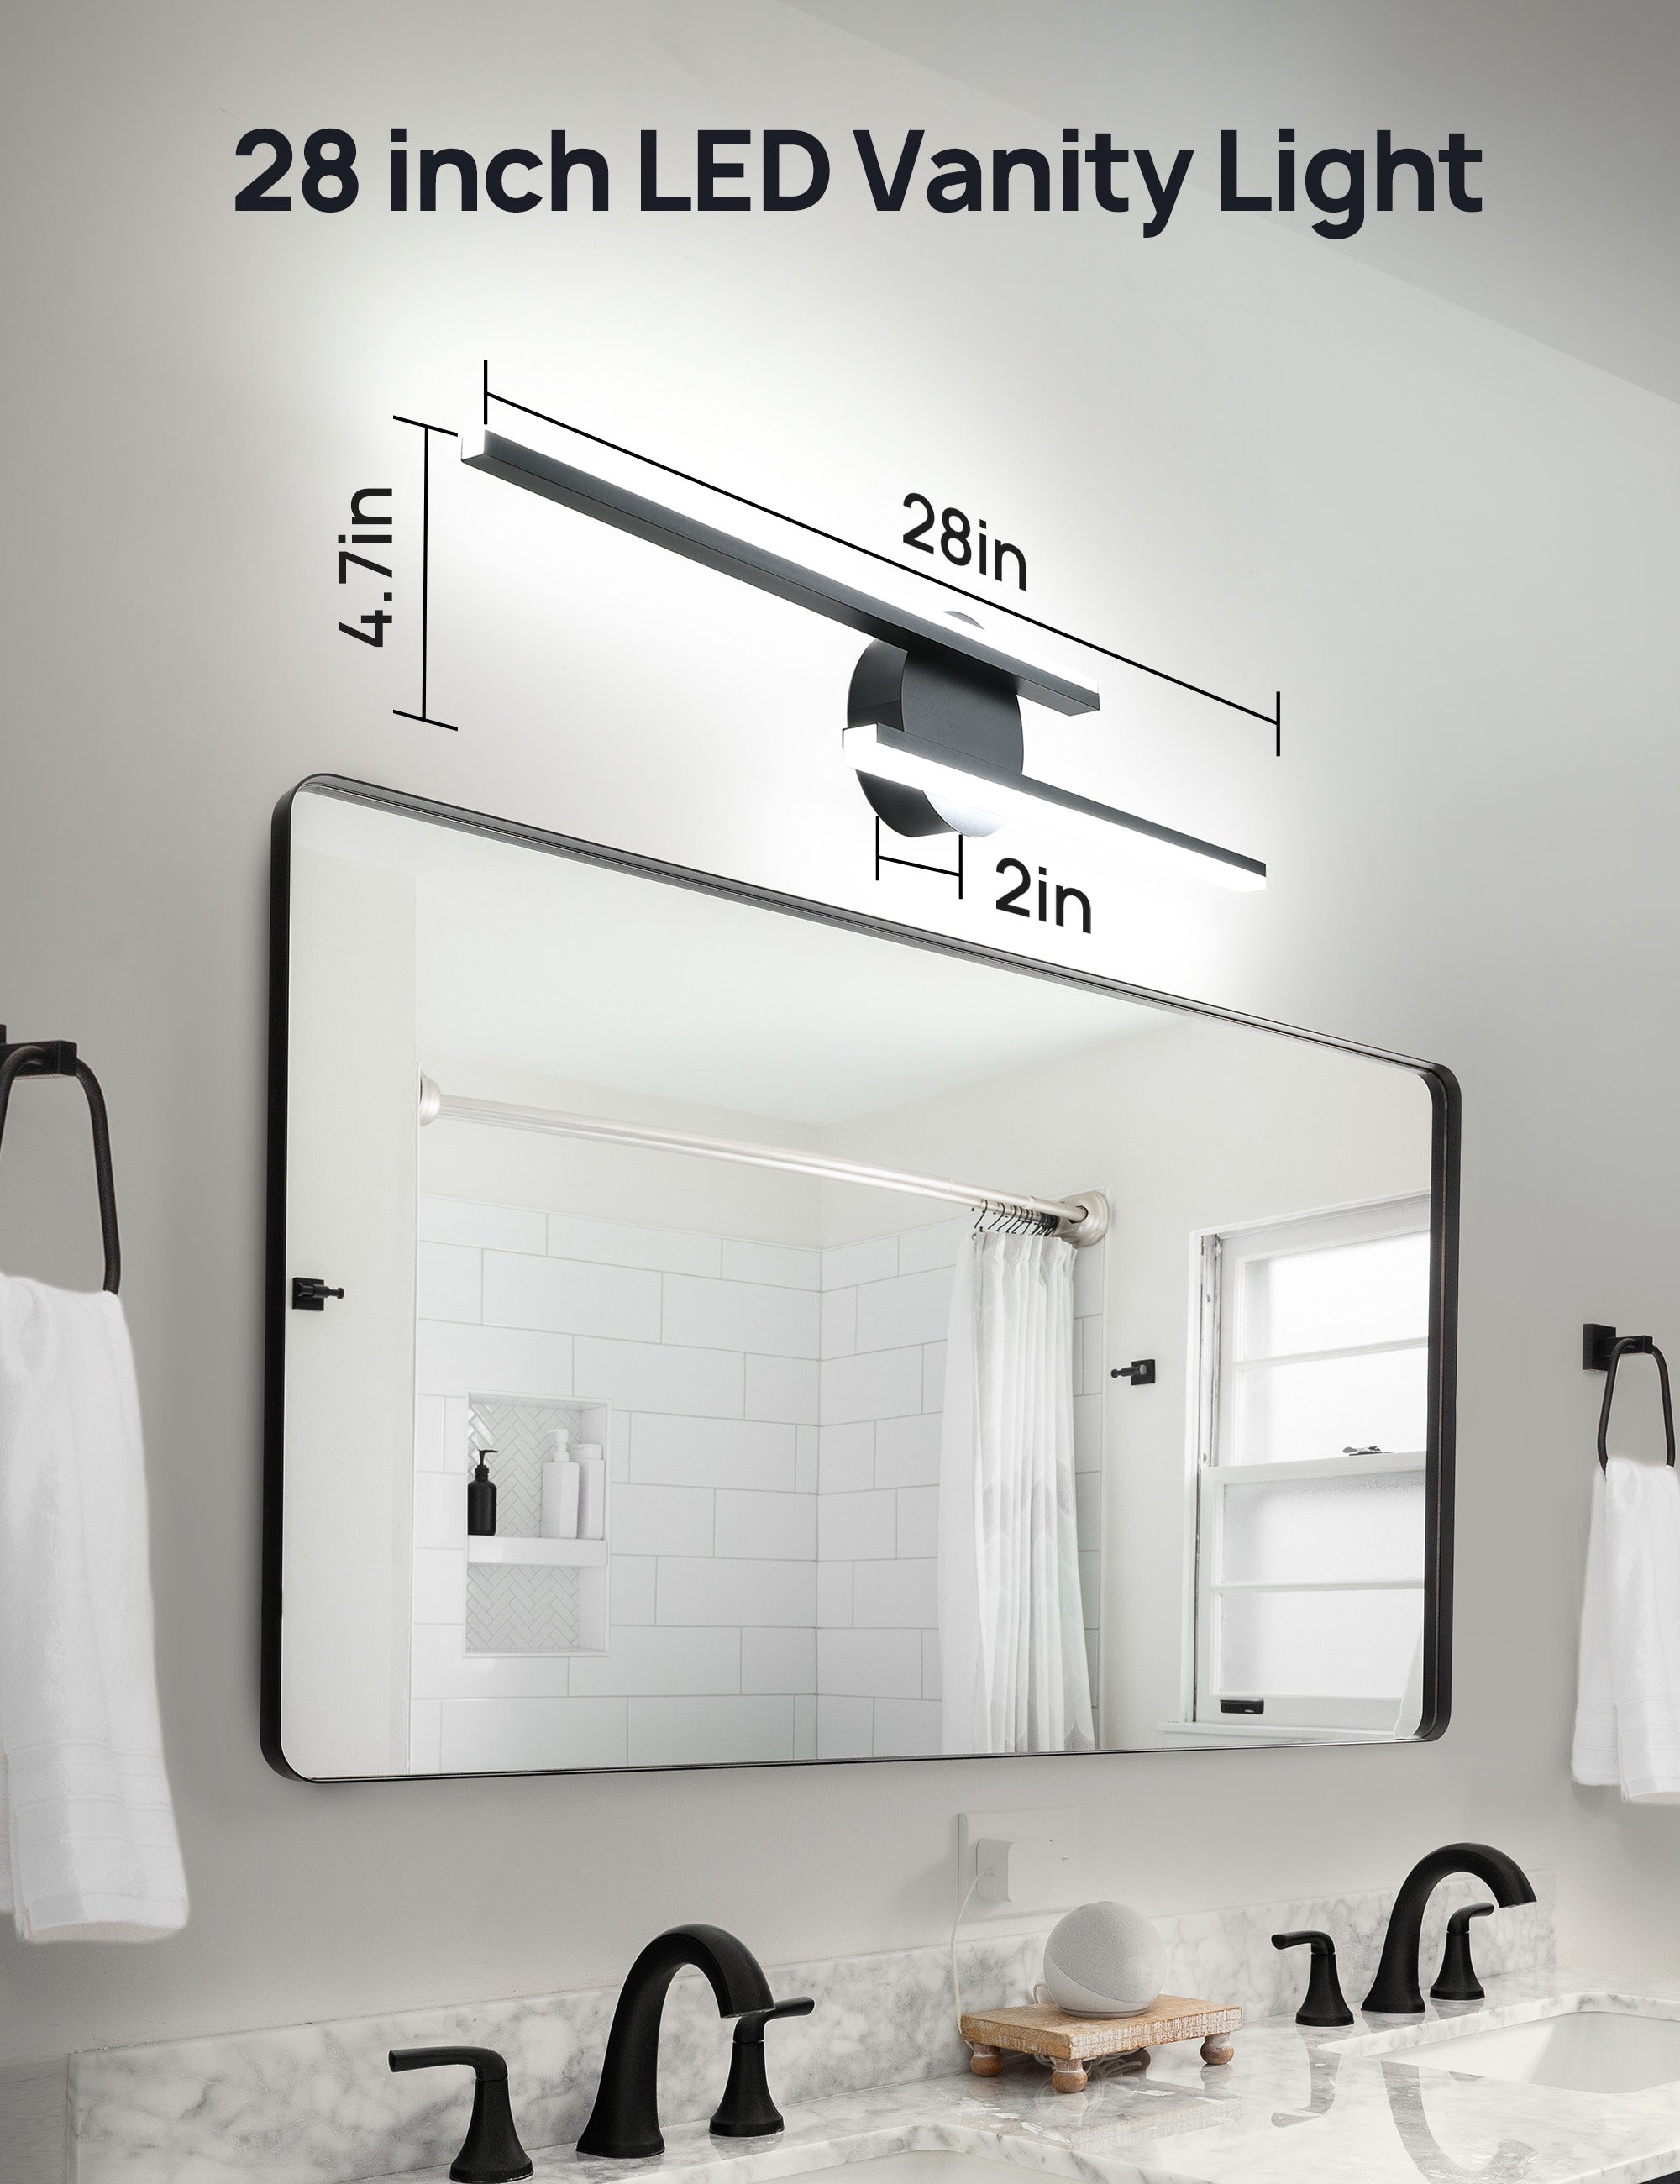 28in Black LED 28W Frosted Aluminum Modern LED Bathroom Vanity Light Fixtures, Cold White 4000K, Double Sided CL017